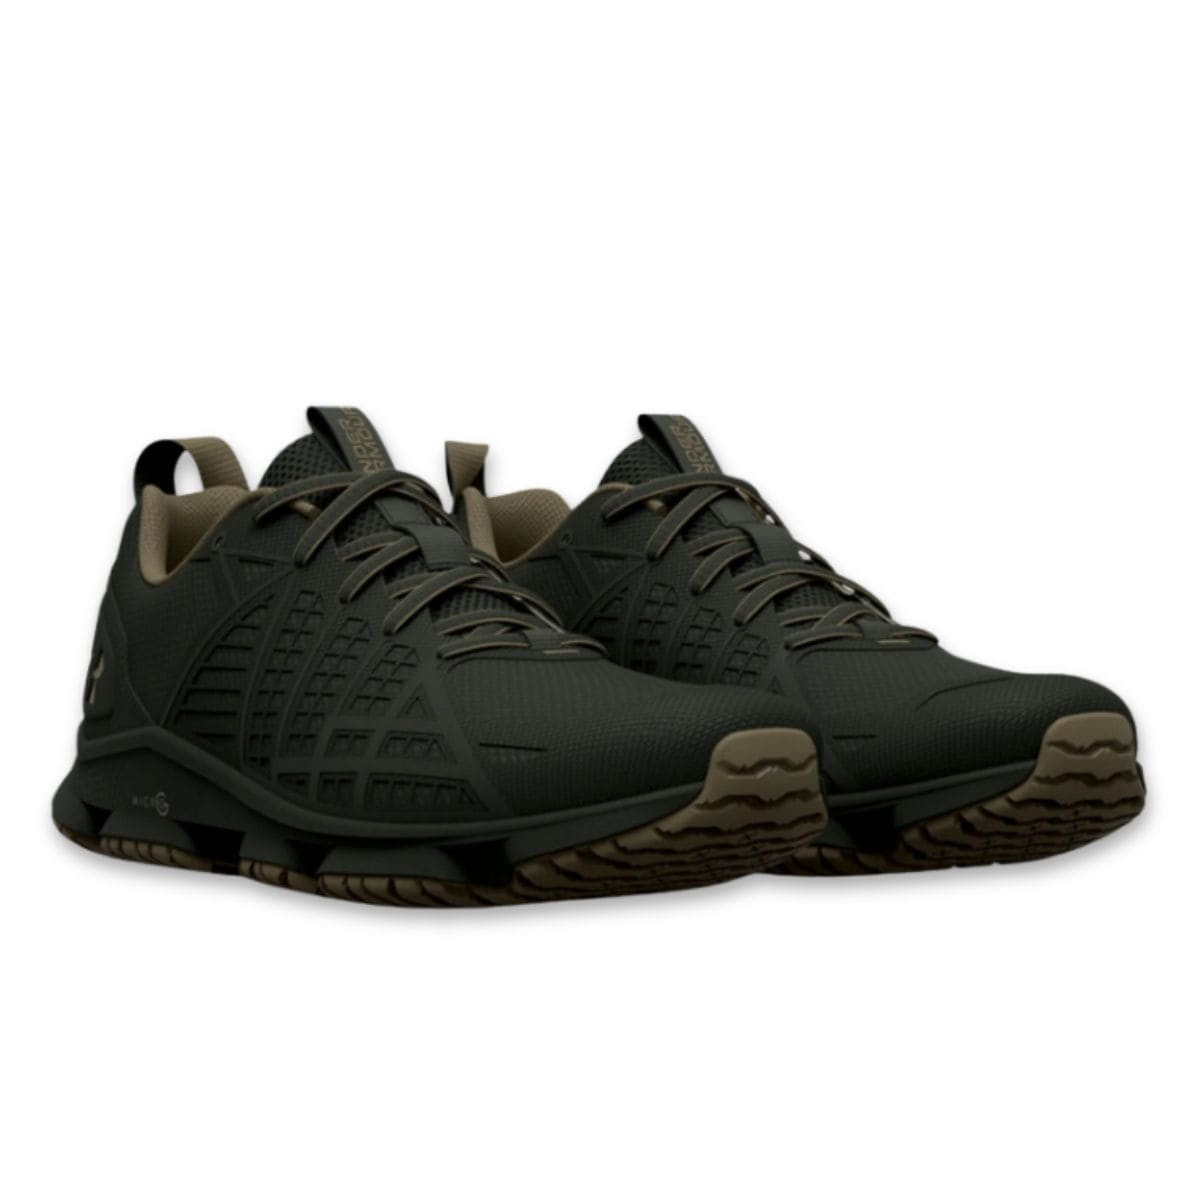 Image of Under Armour Men's Micro G Strikefast Hiking Tactical Shoe